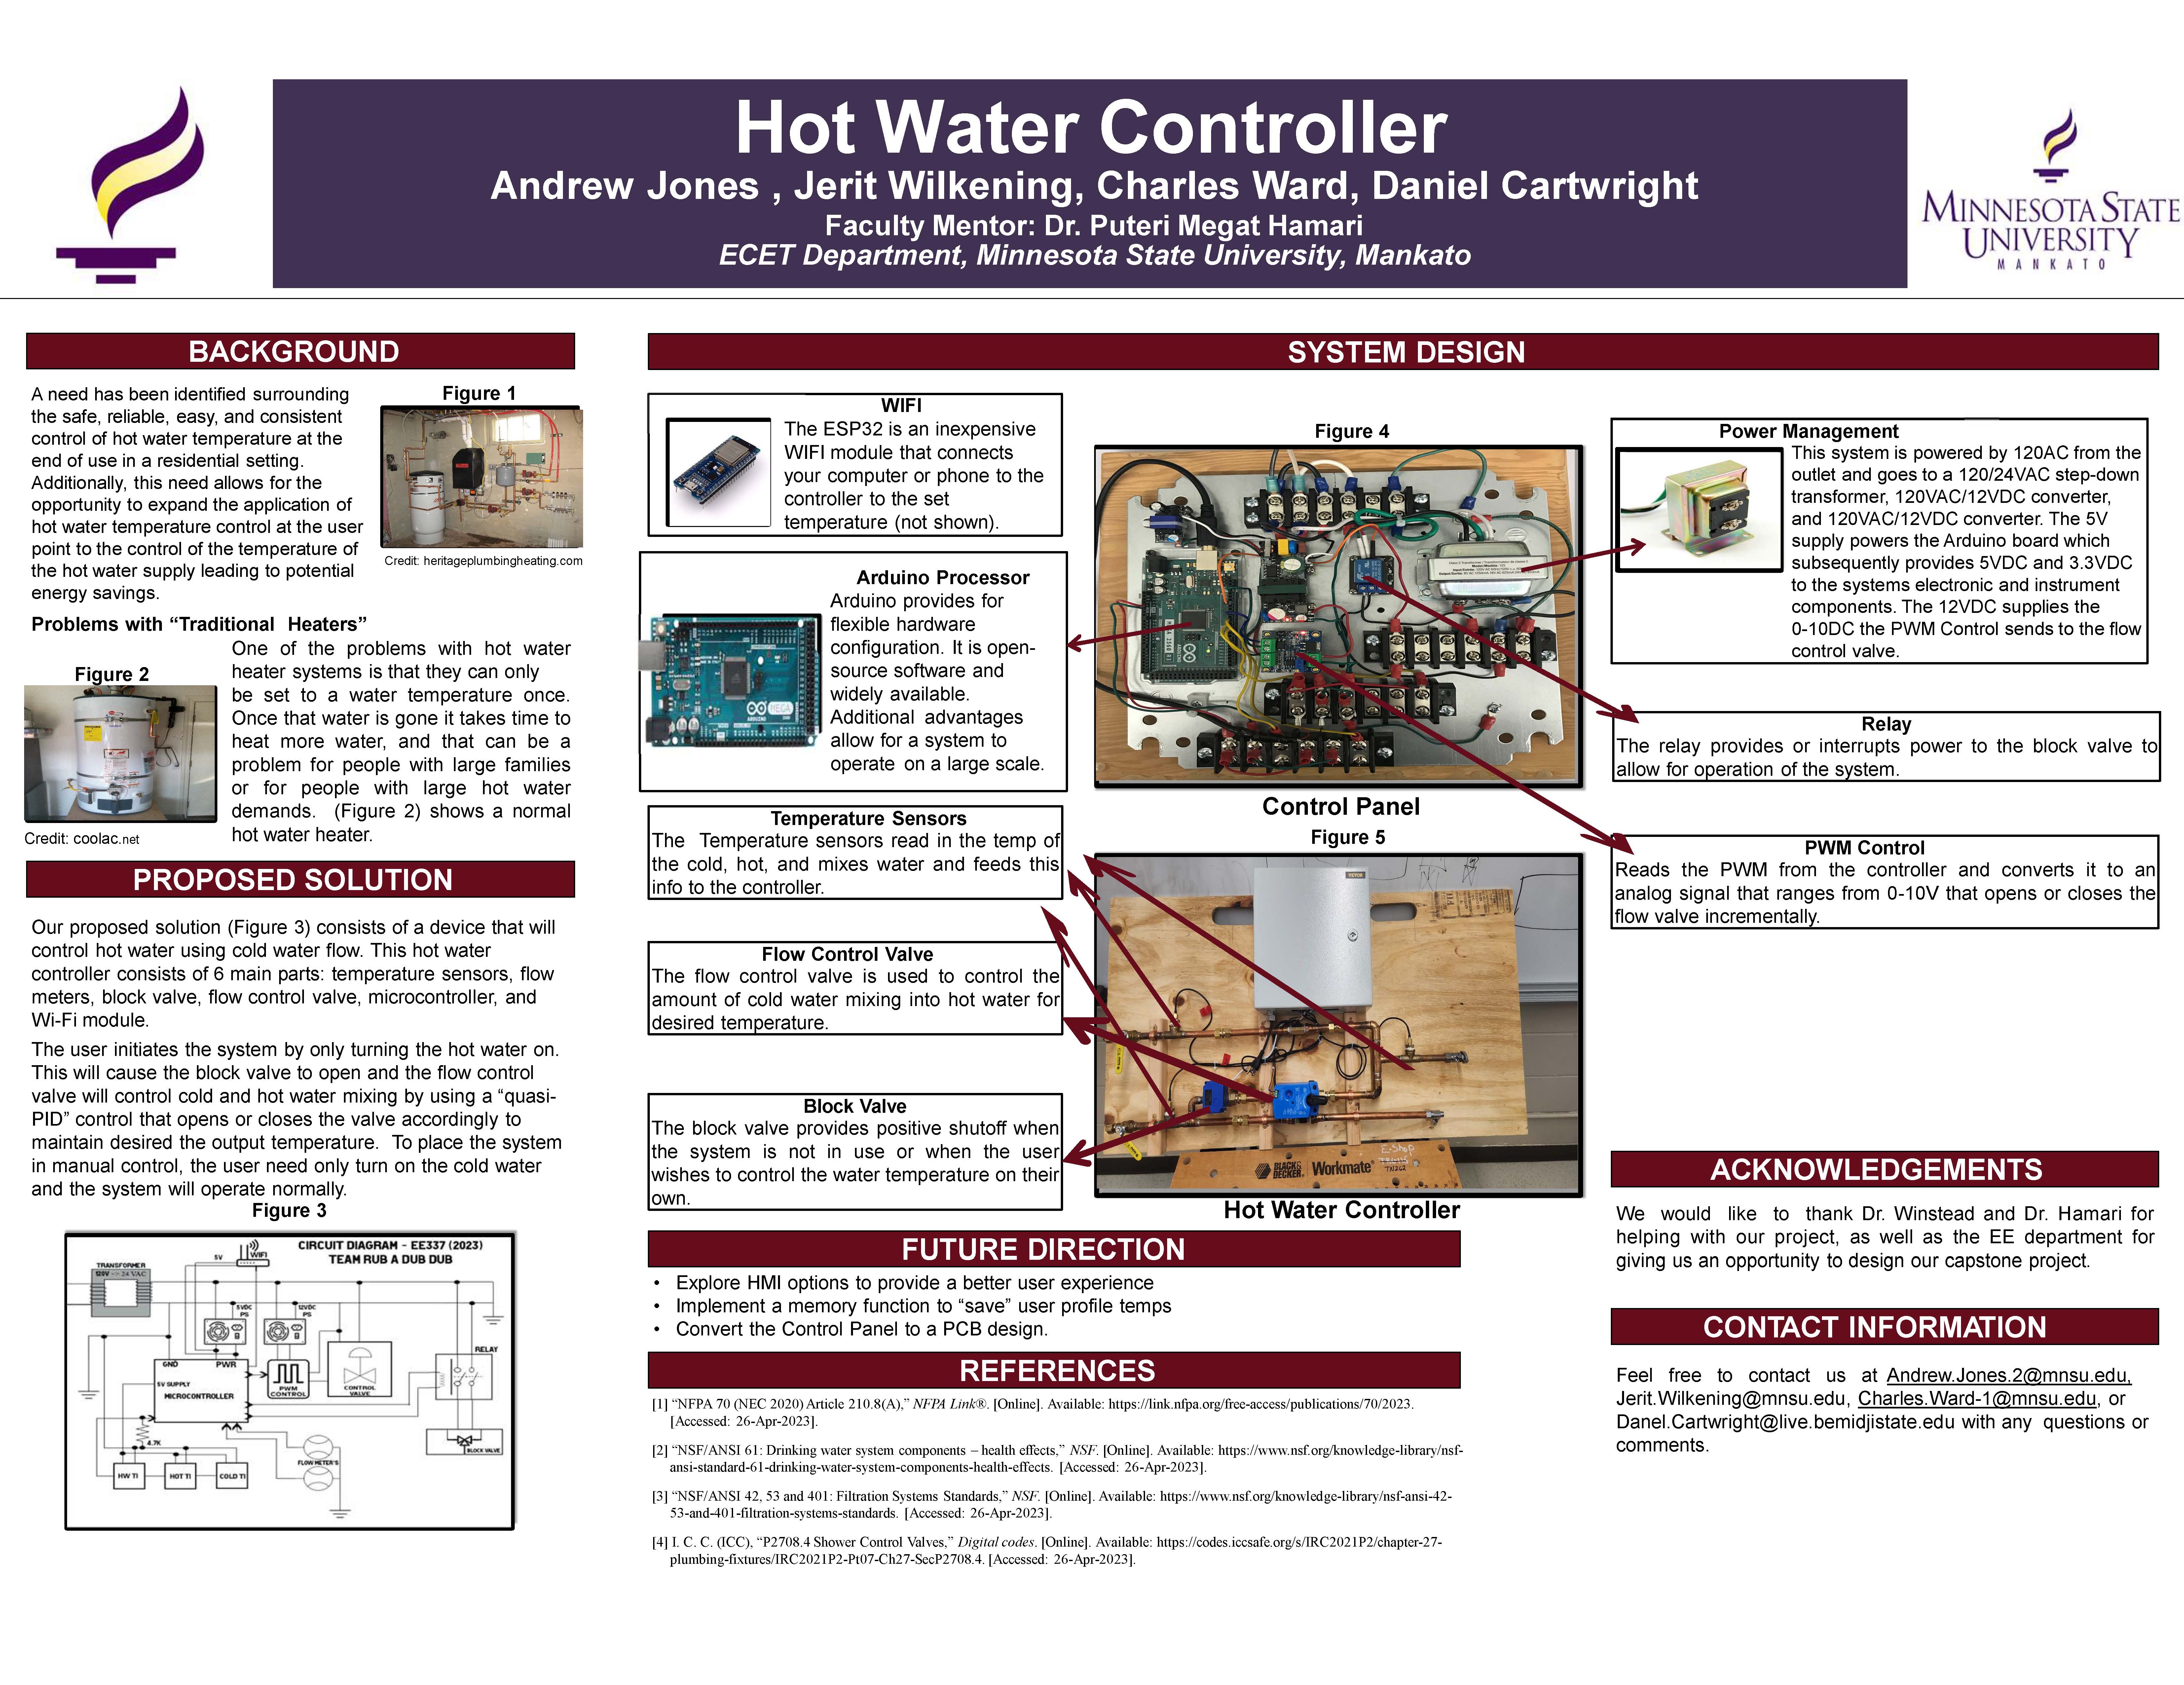 a poster of a hot water controller